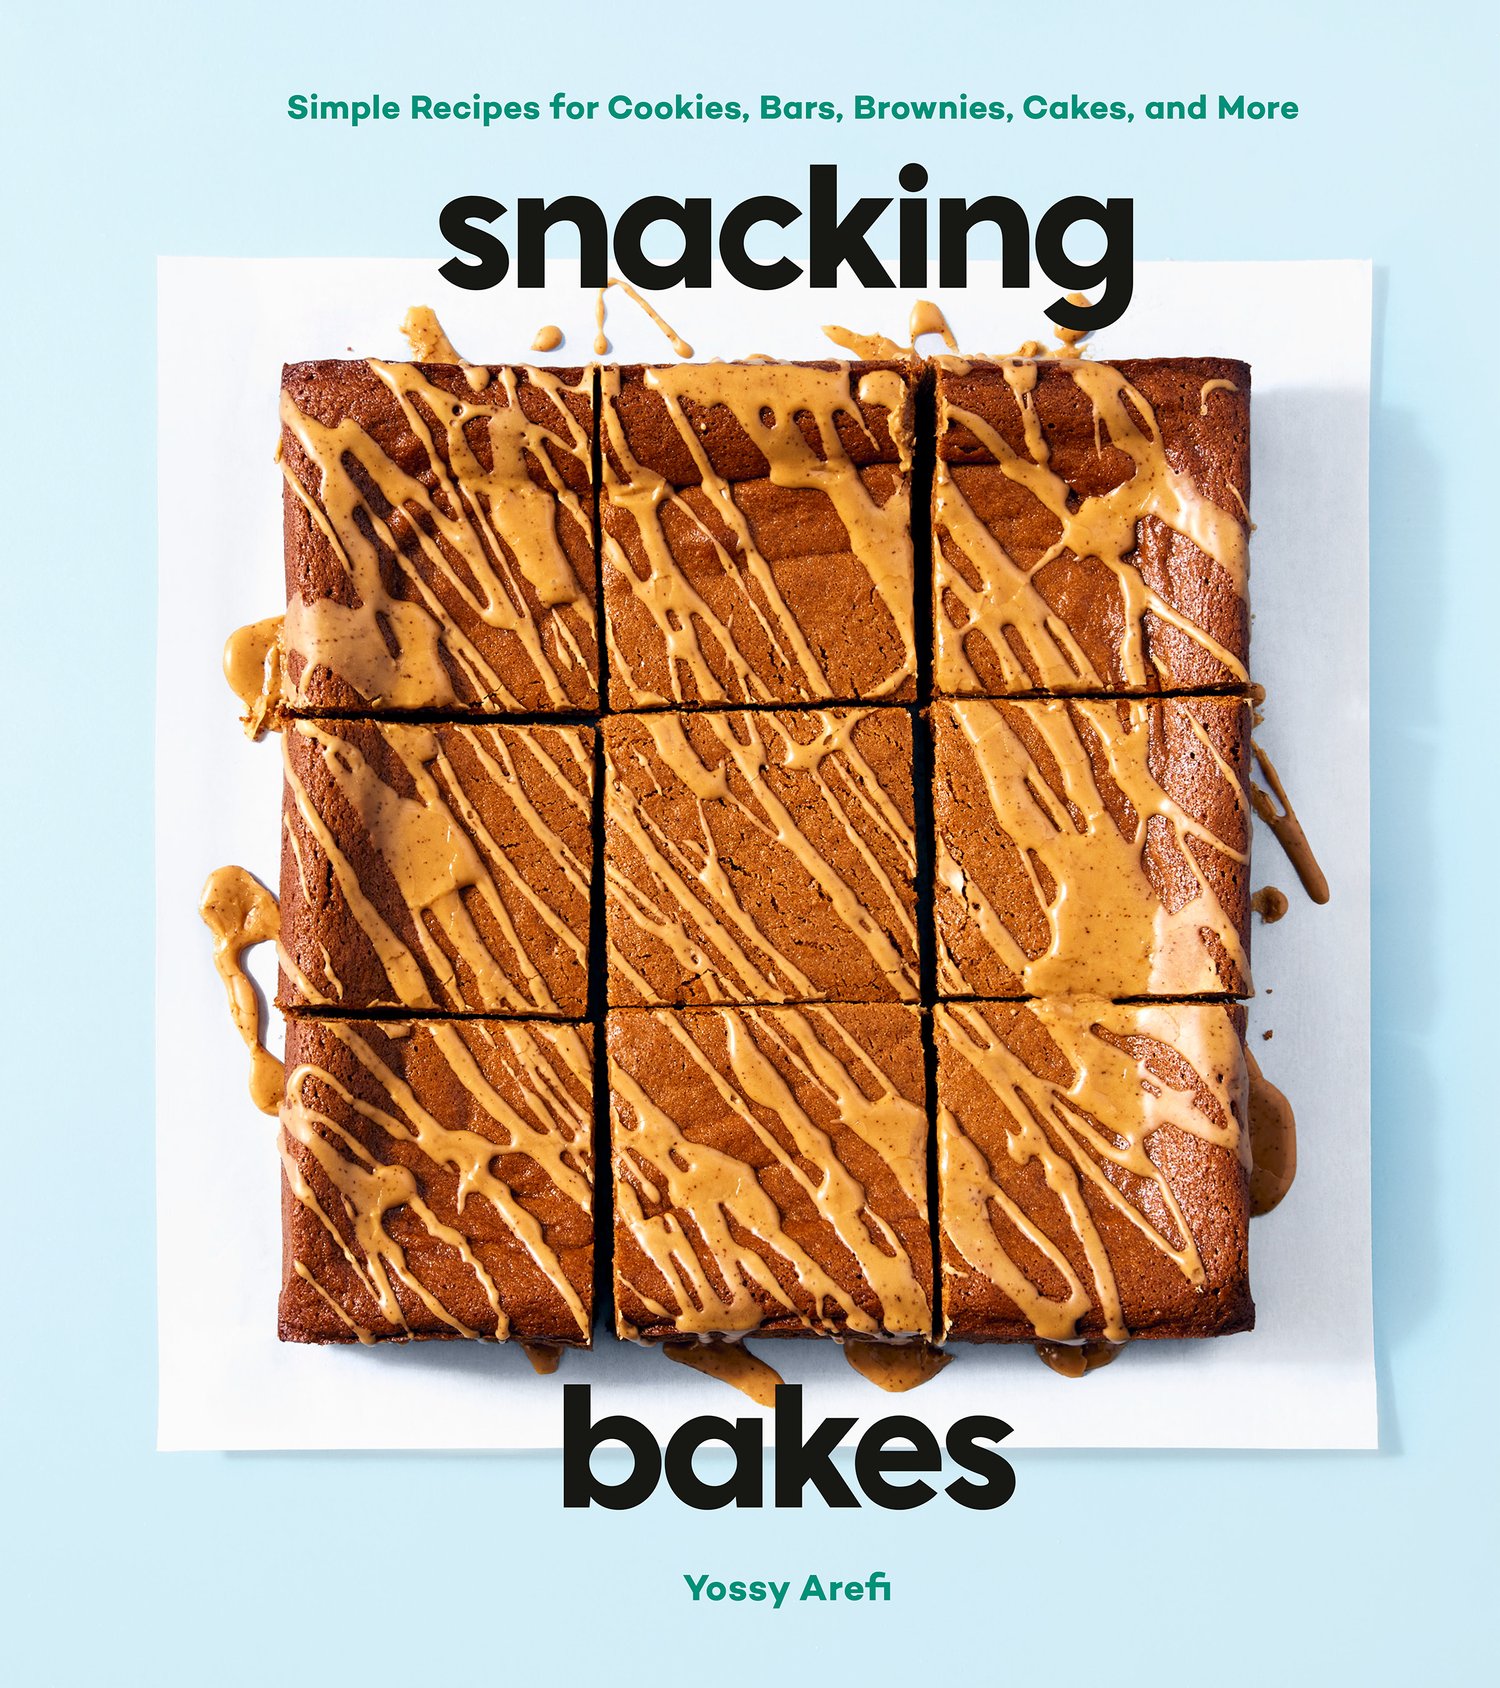 preorder-my-new-book-snacking-bakes-apt-2b-baking-co